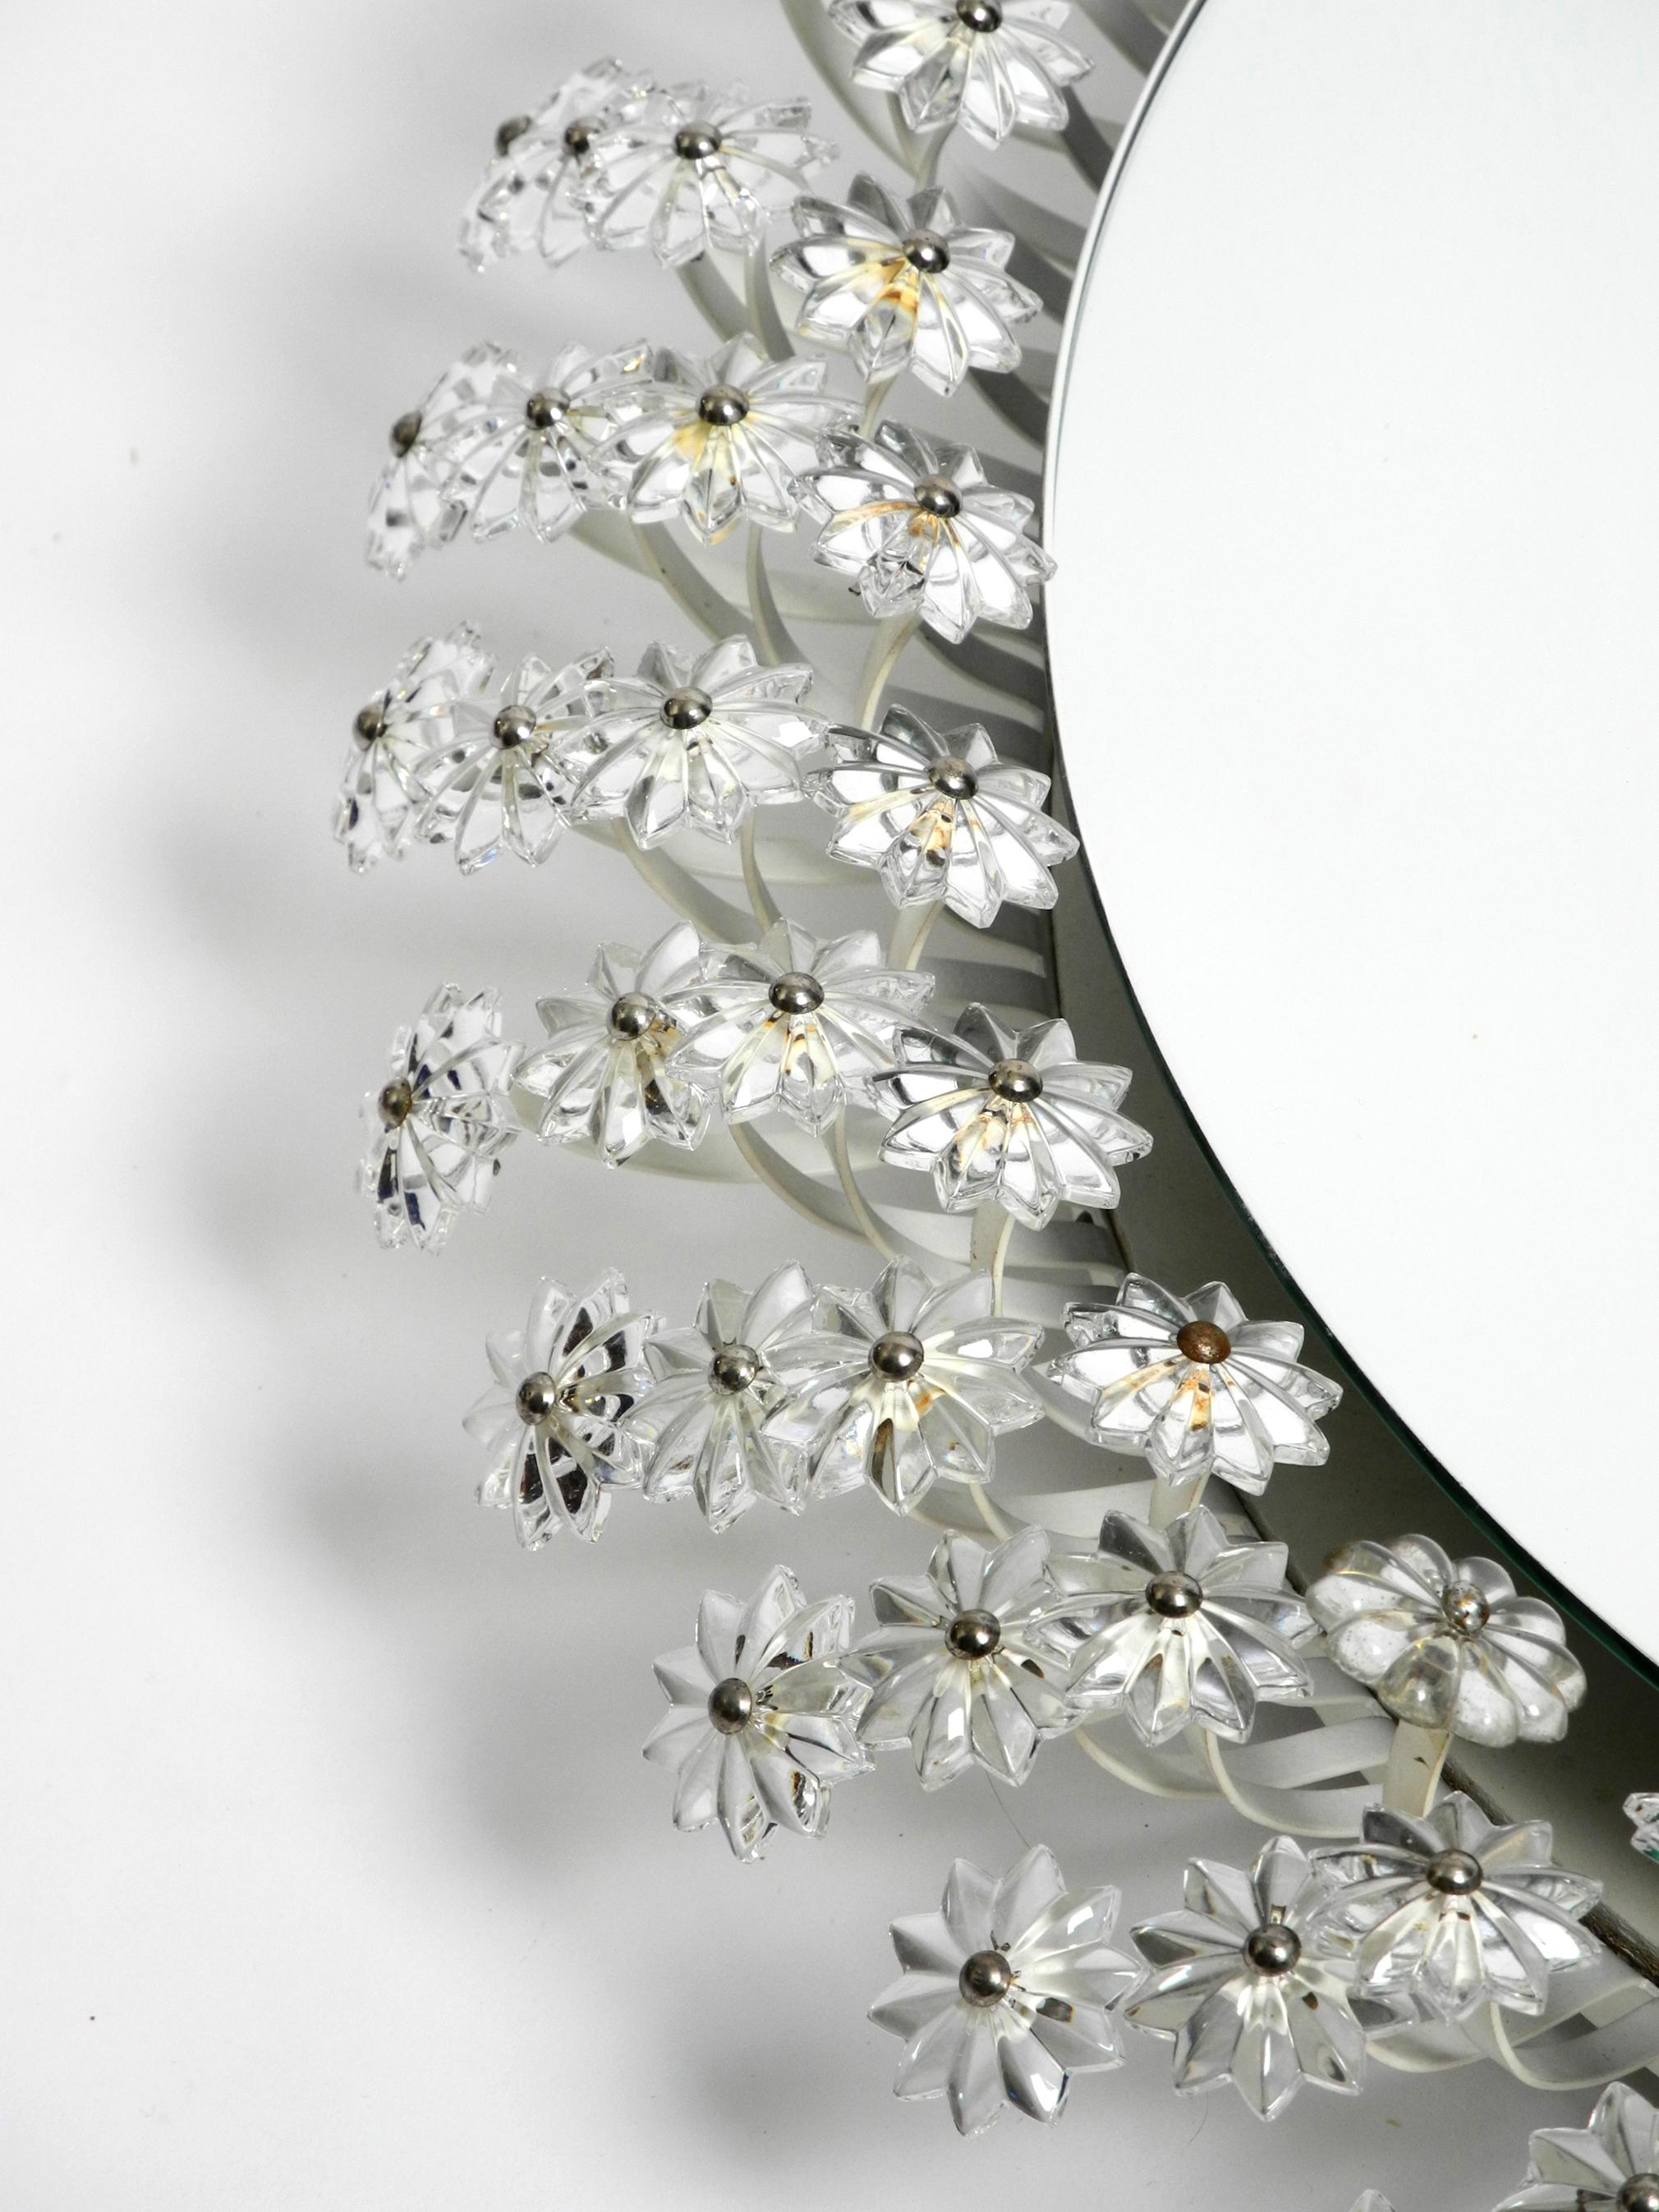 Mid-20th Century Large Mid-Century Modern Illuminated Floral Mirror by Schöninger For Sale